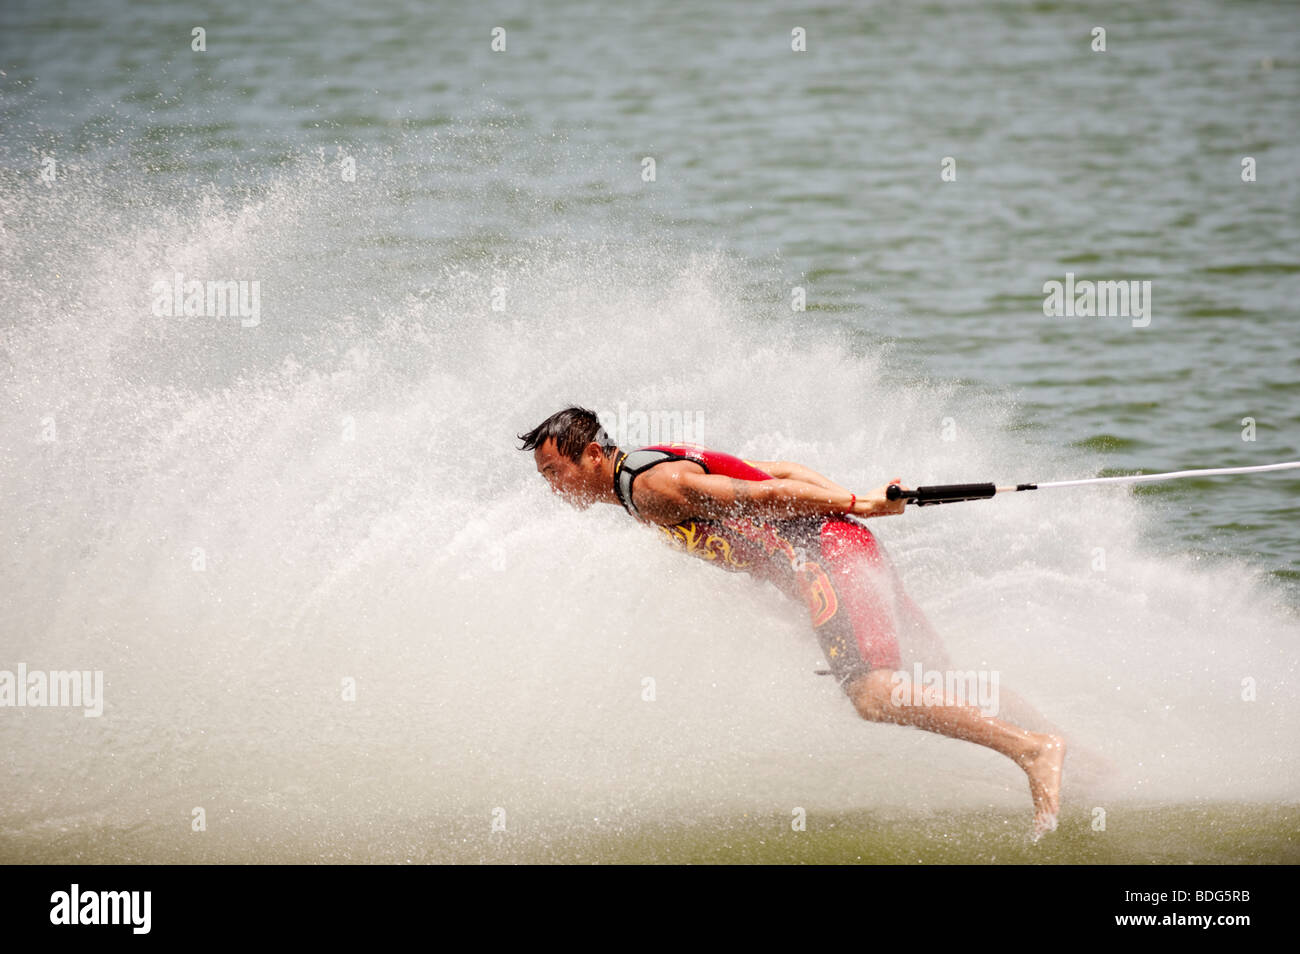 Xin Yang of China competes in Men's Barefoot Water Skiing Competition, World Games, Kaohsiung, Taiwan, July 22, 2009 Stock Photo